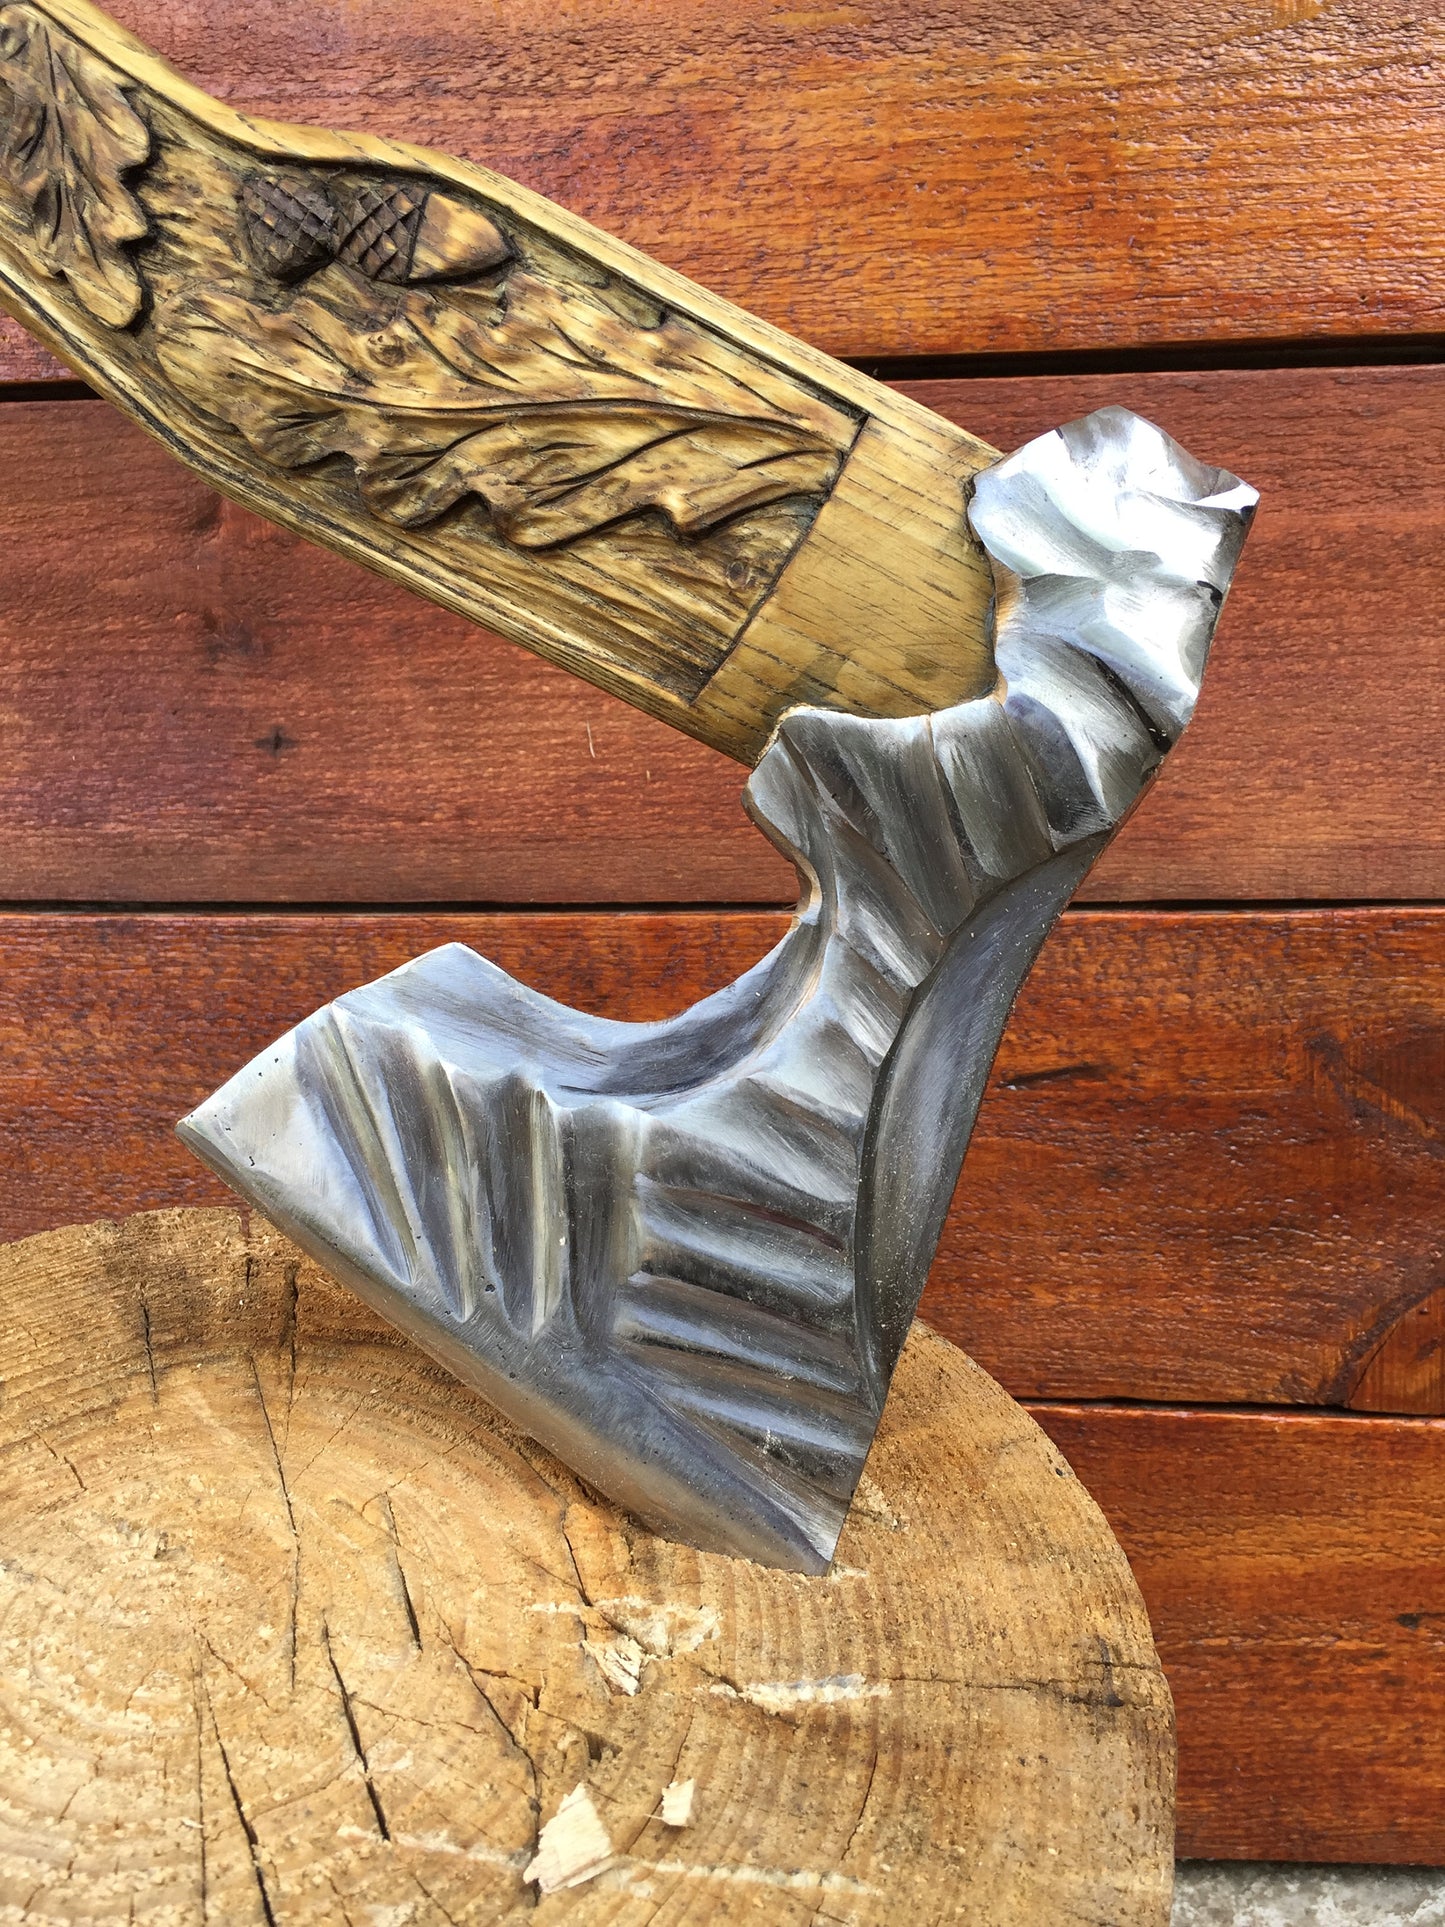 viking axe, medieval axe, mens gifts, iron gift for him, tomahawk, hatchet, hiking, hunting, chopping axe, gifts for men, manly iron gifts